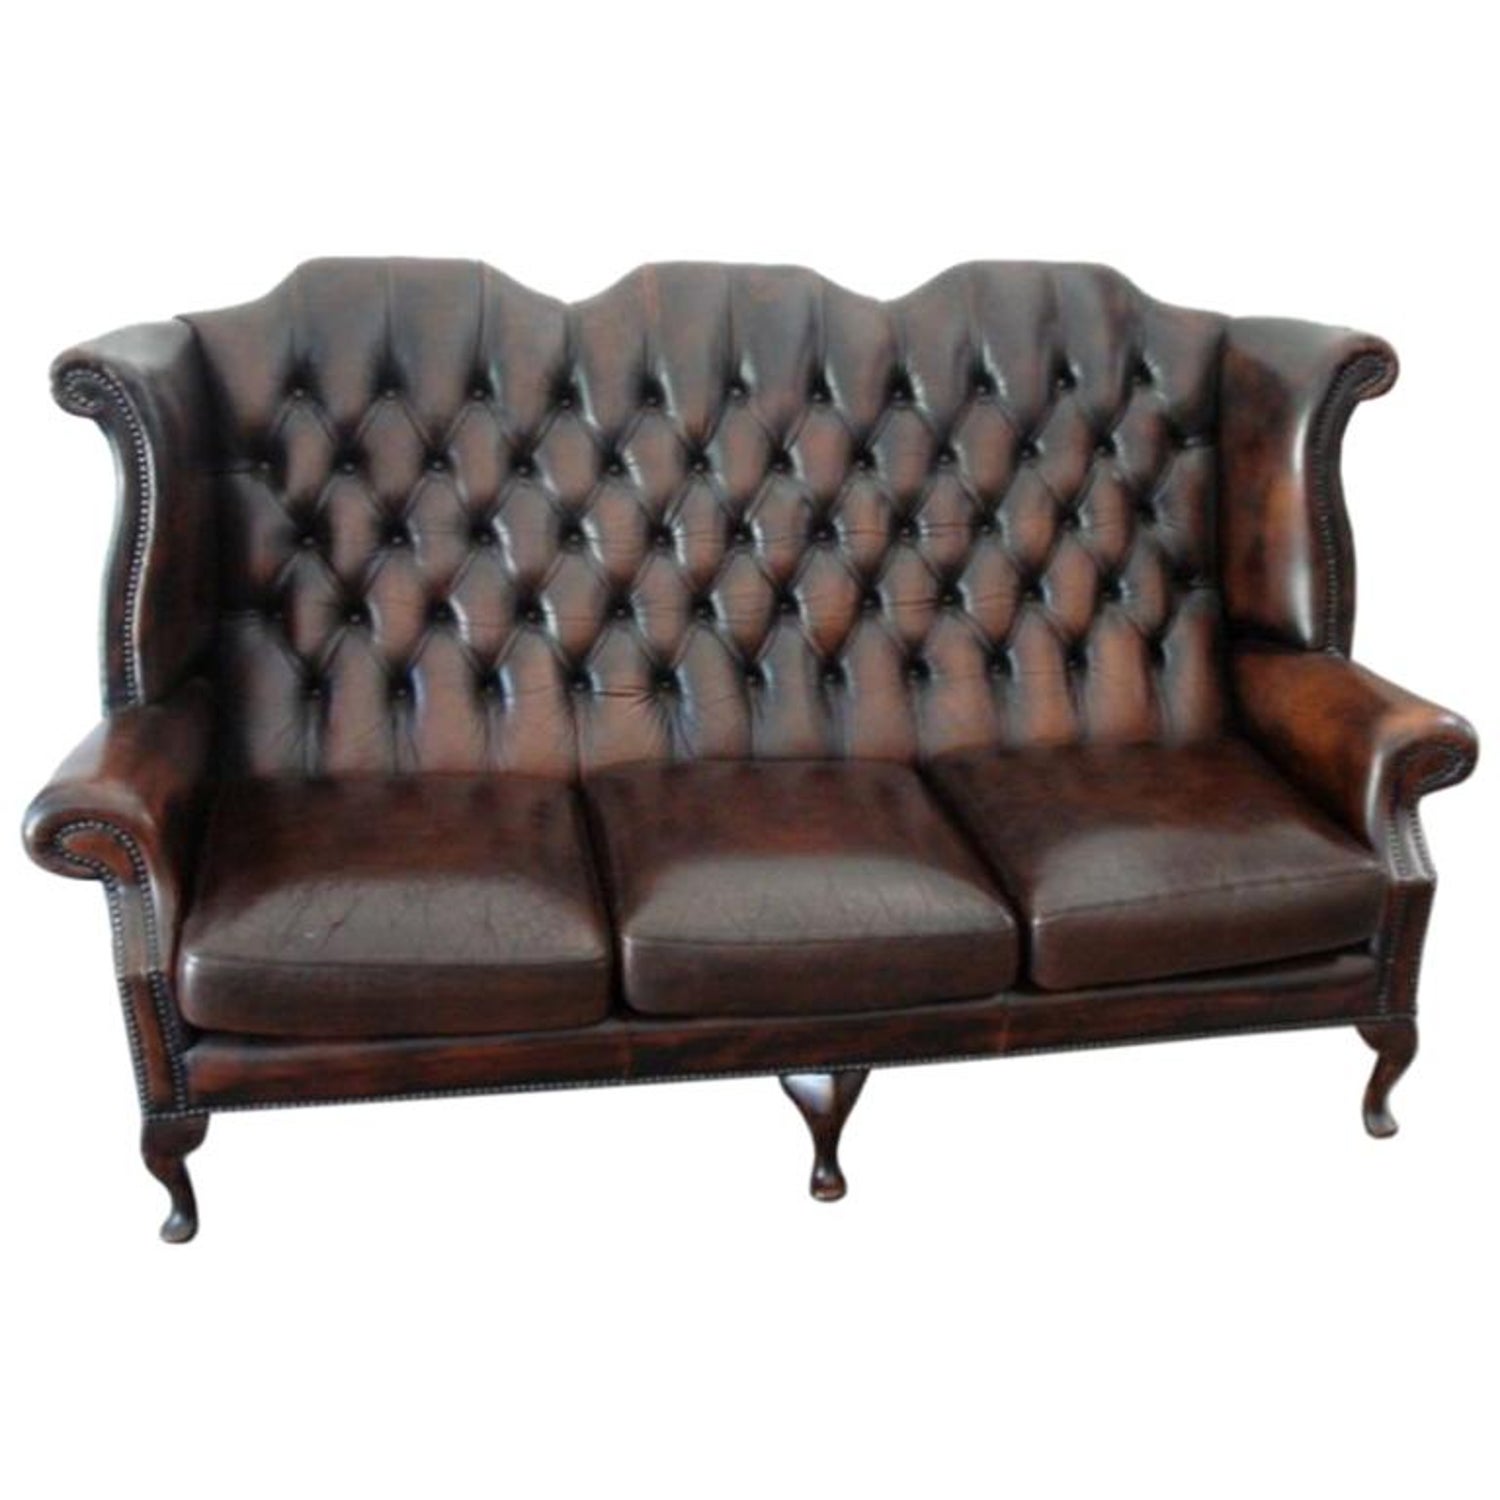 Antique English Wing Back Leather Sofa For Sale at 1stDibs